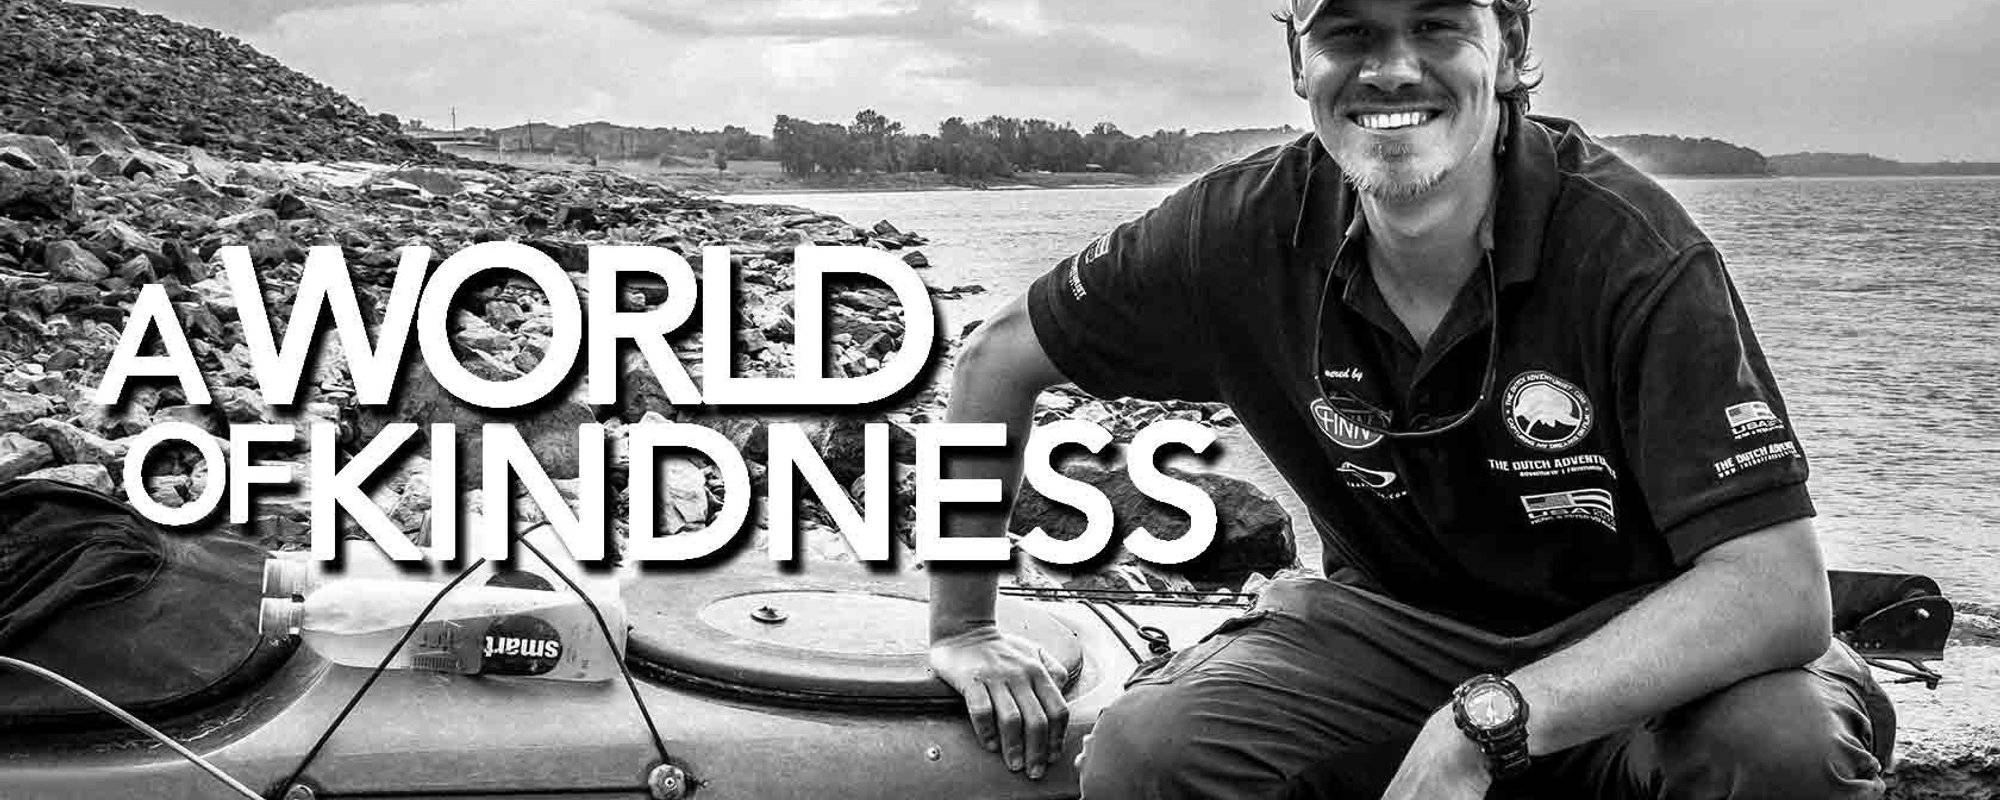 Mississippi Solo Series #6 - a World of Kindness